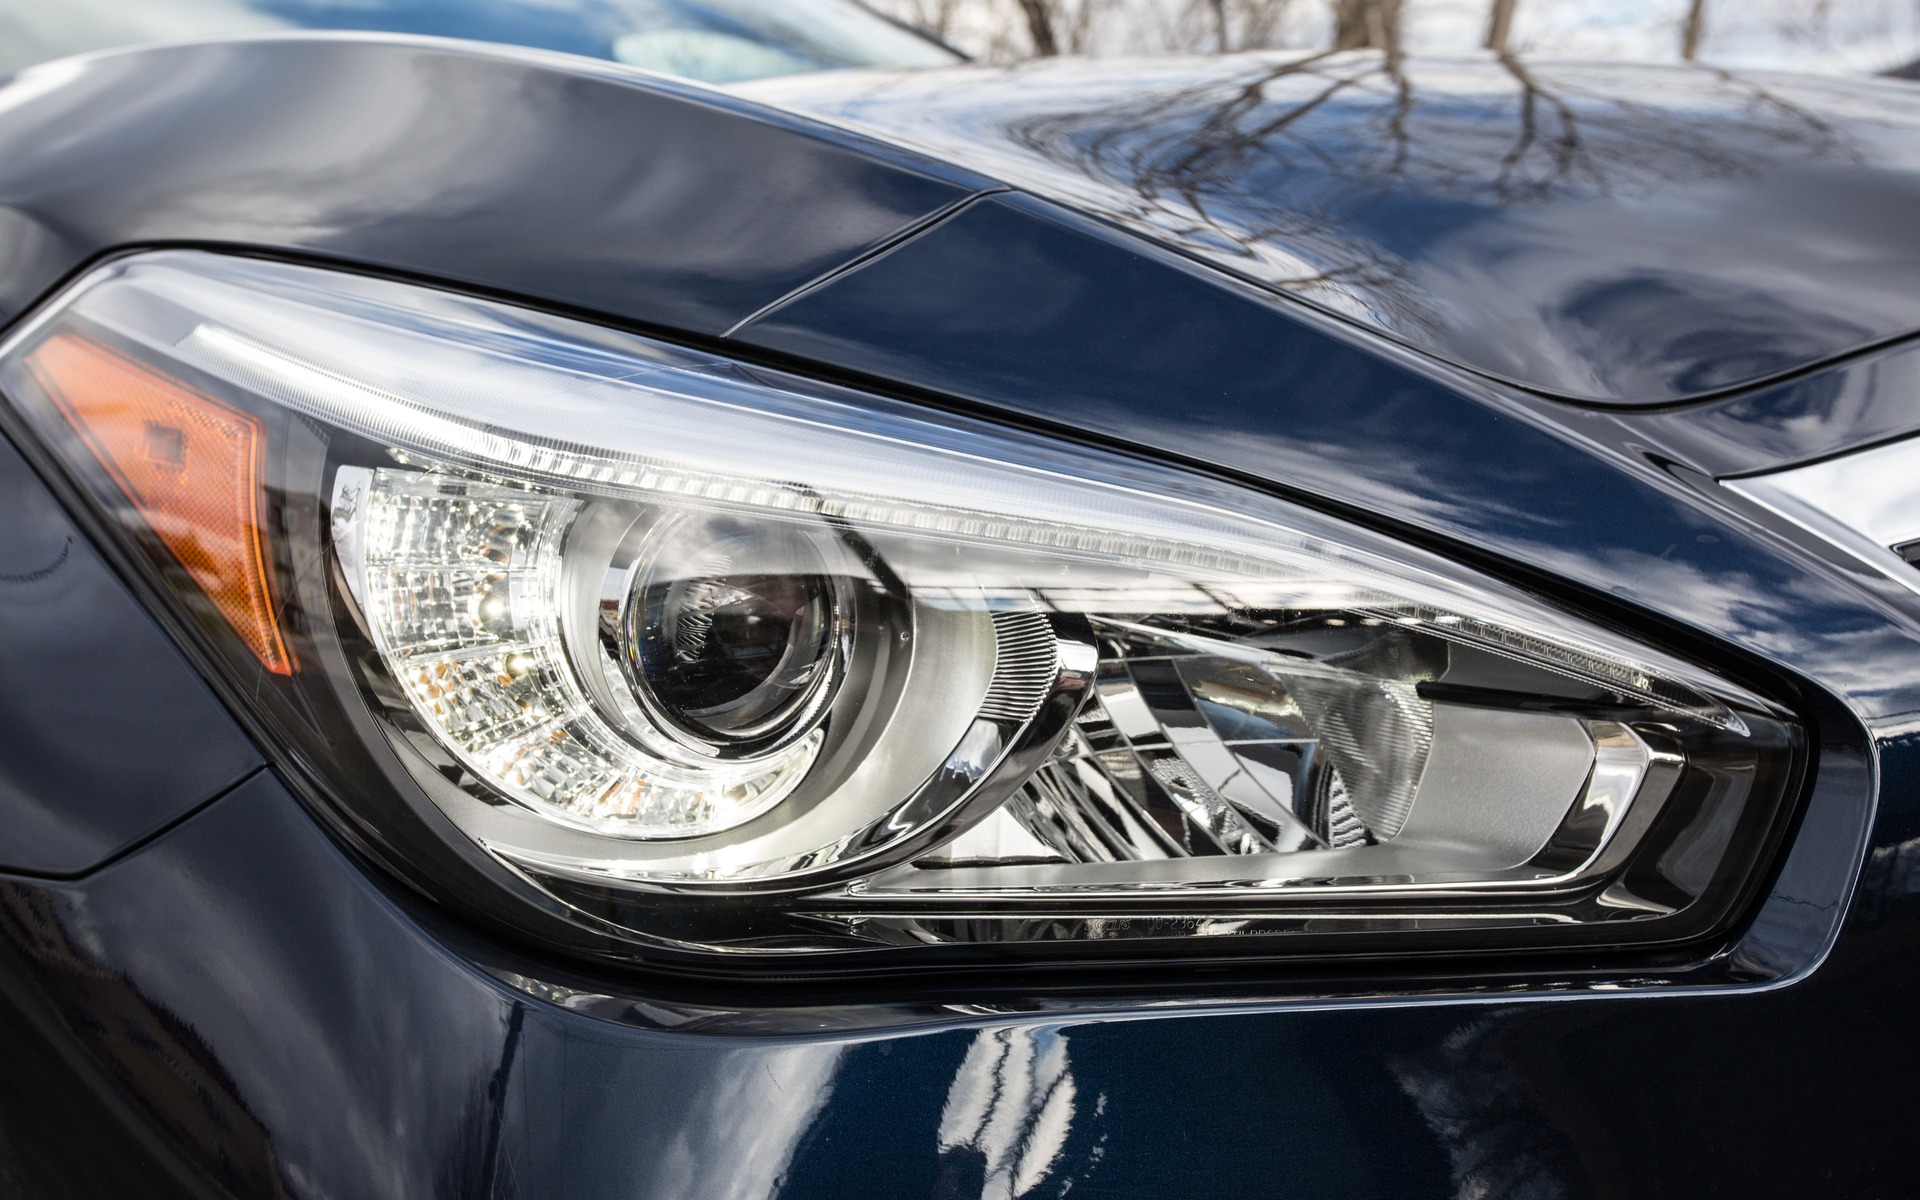 Aggressive-looking headlights, now with LED accents.